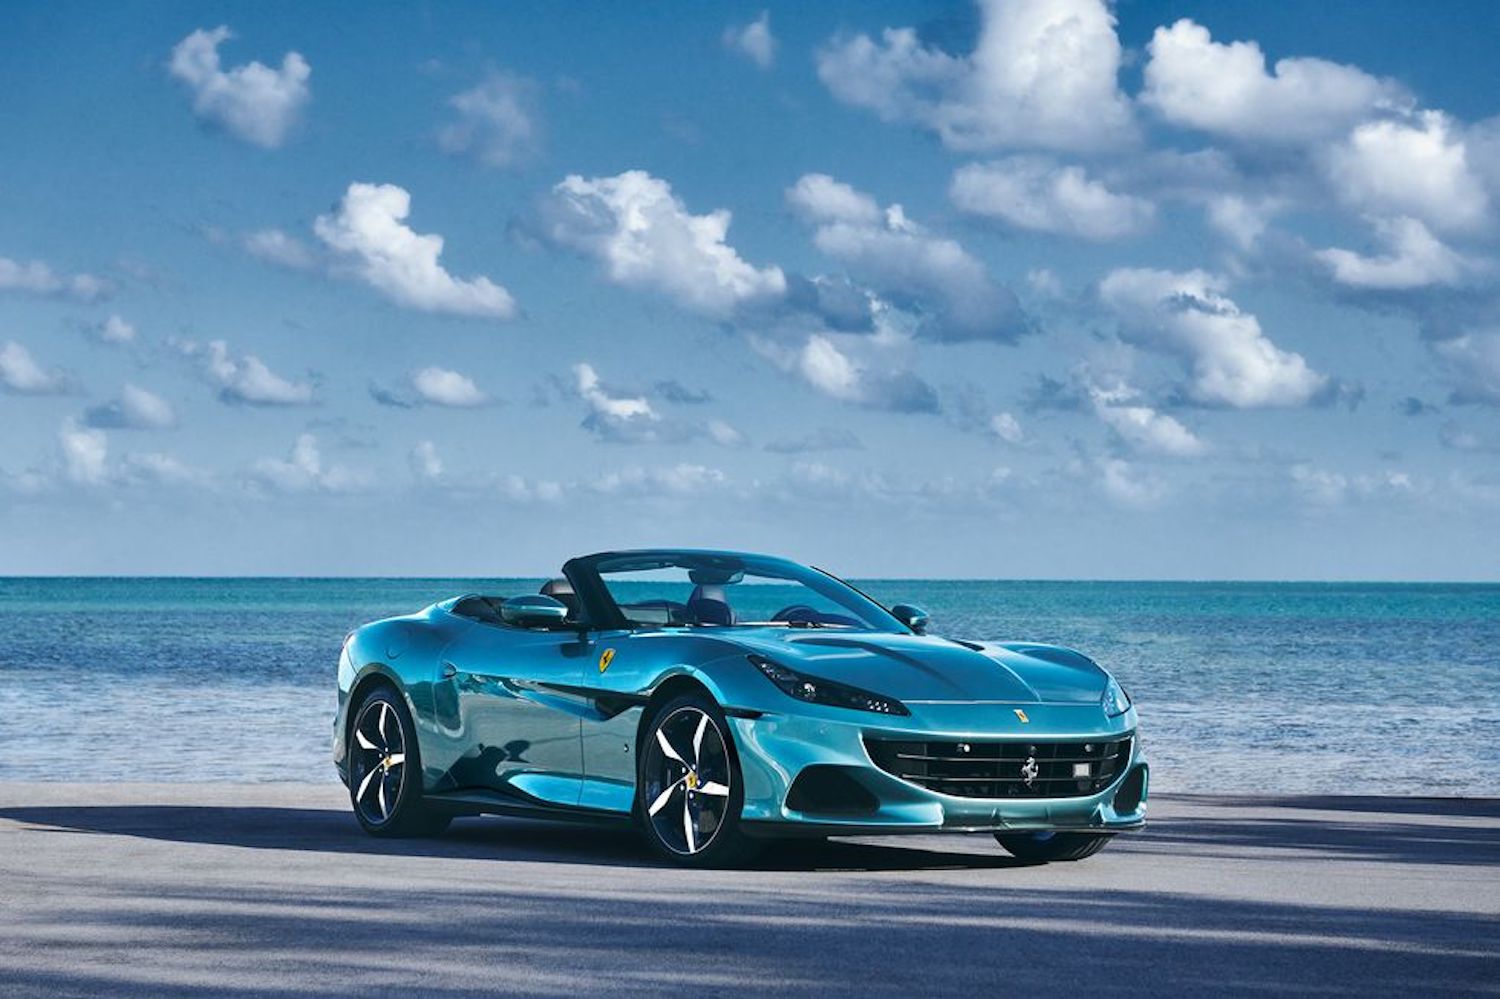 2021 Ferrari Portofino M front end angle parked in front of a beach with blue skies in the back.